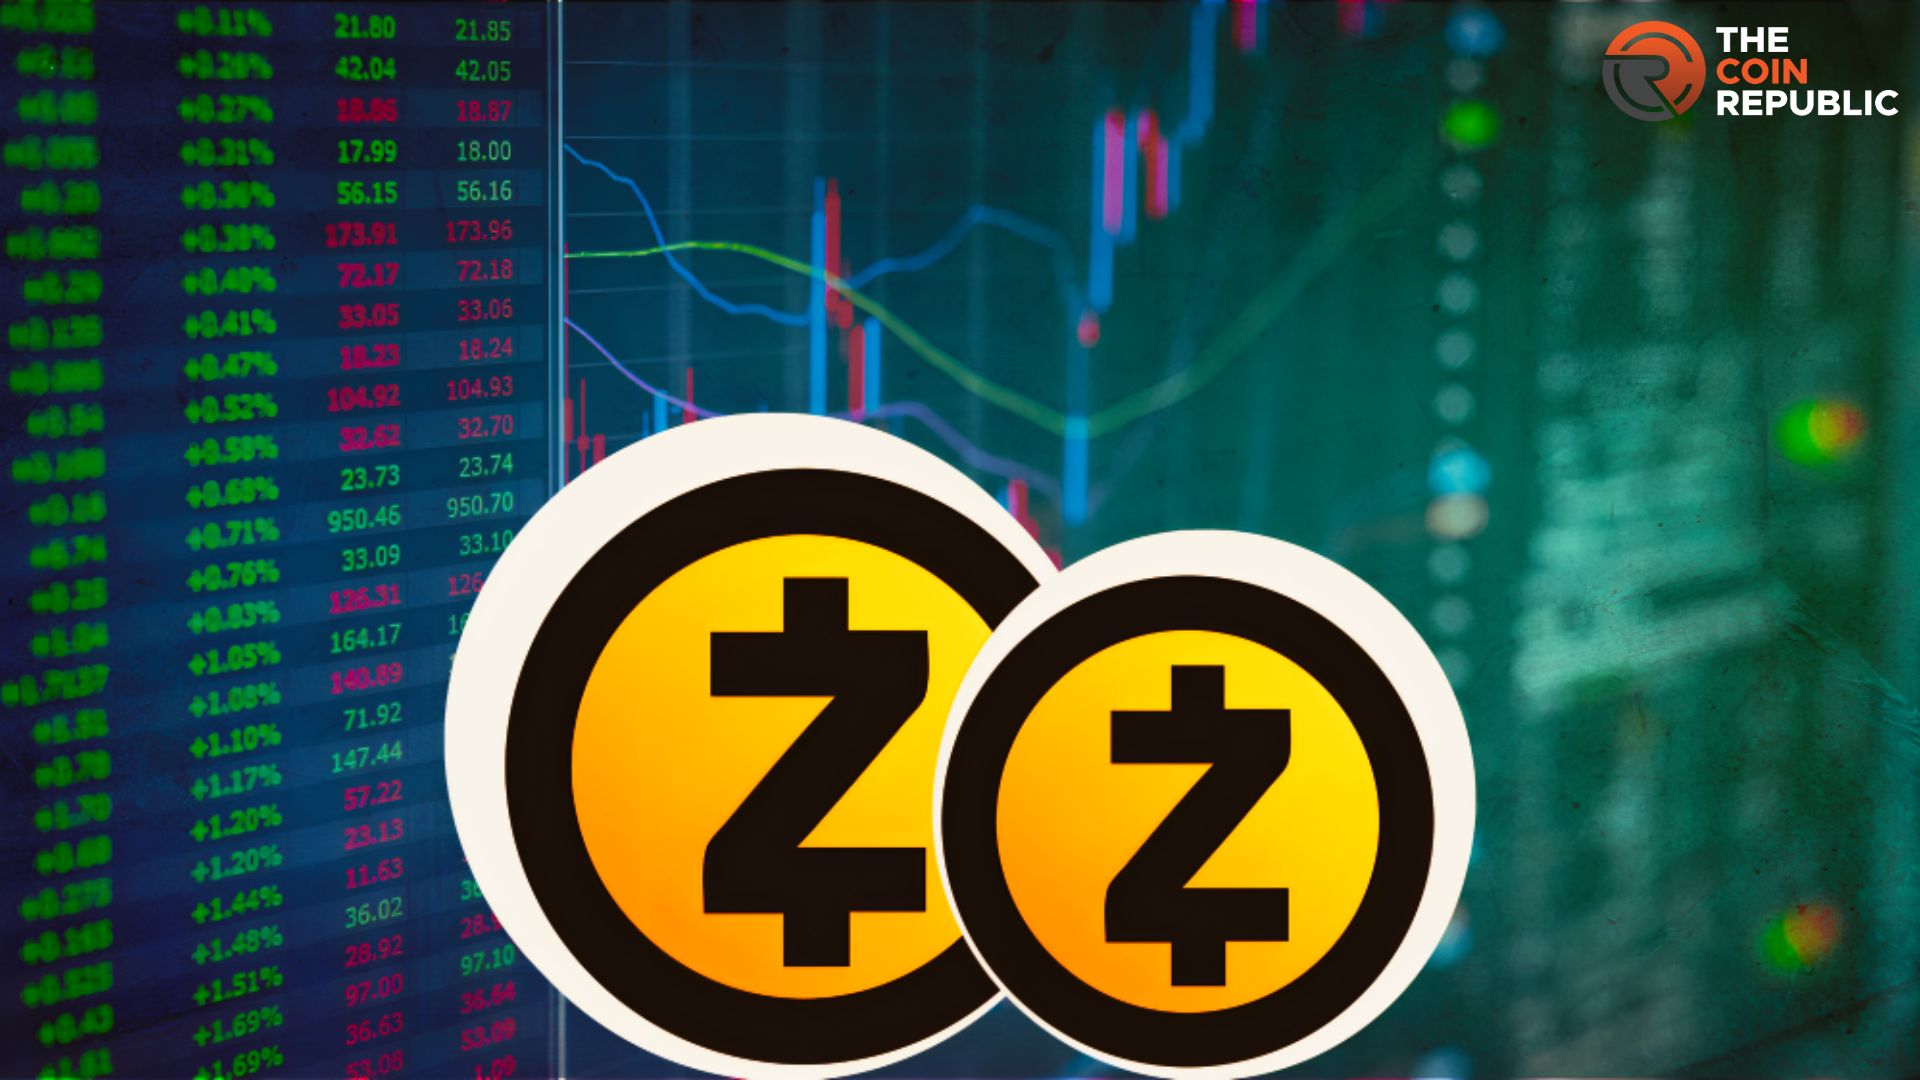 Zcash Price Prediction: Will ZEC Escape This Consolidation Phase?